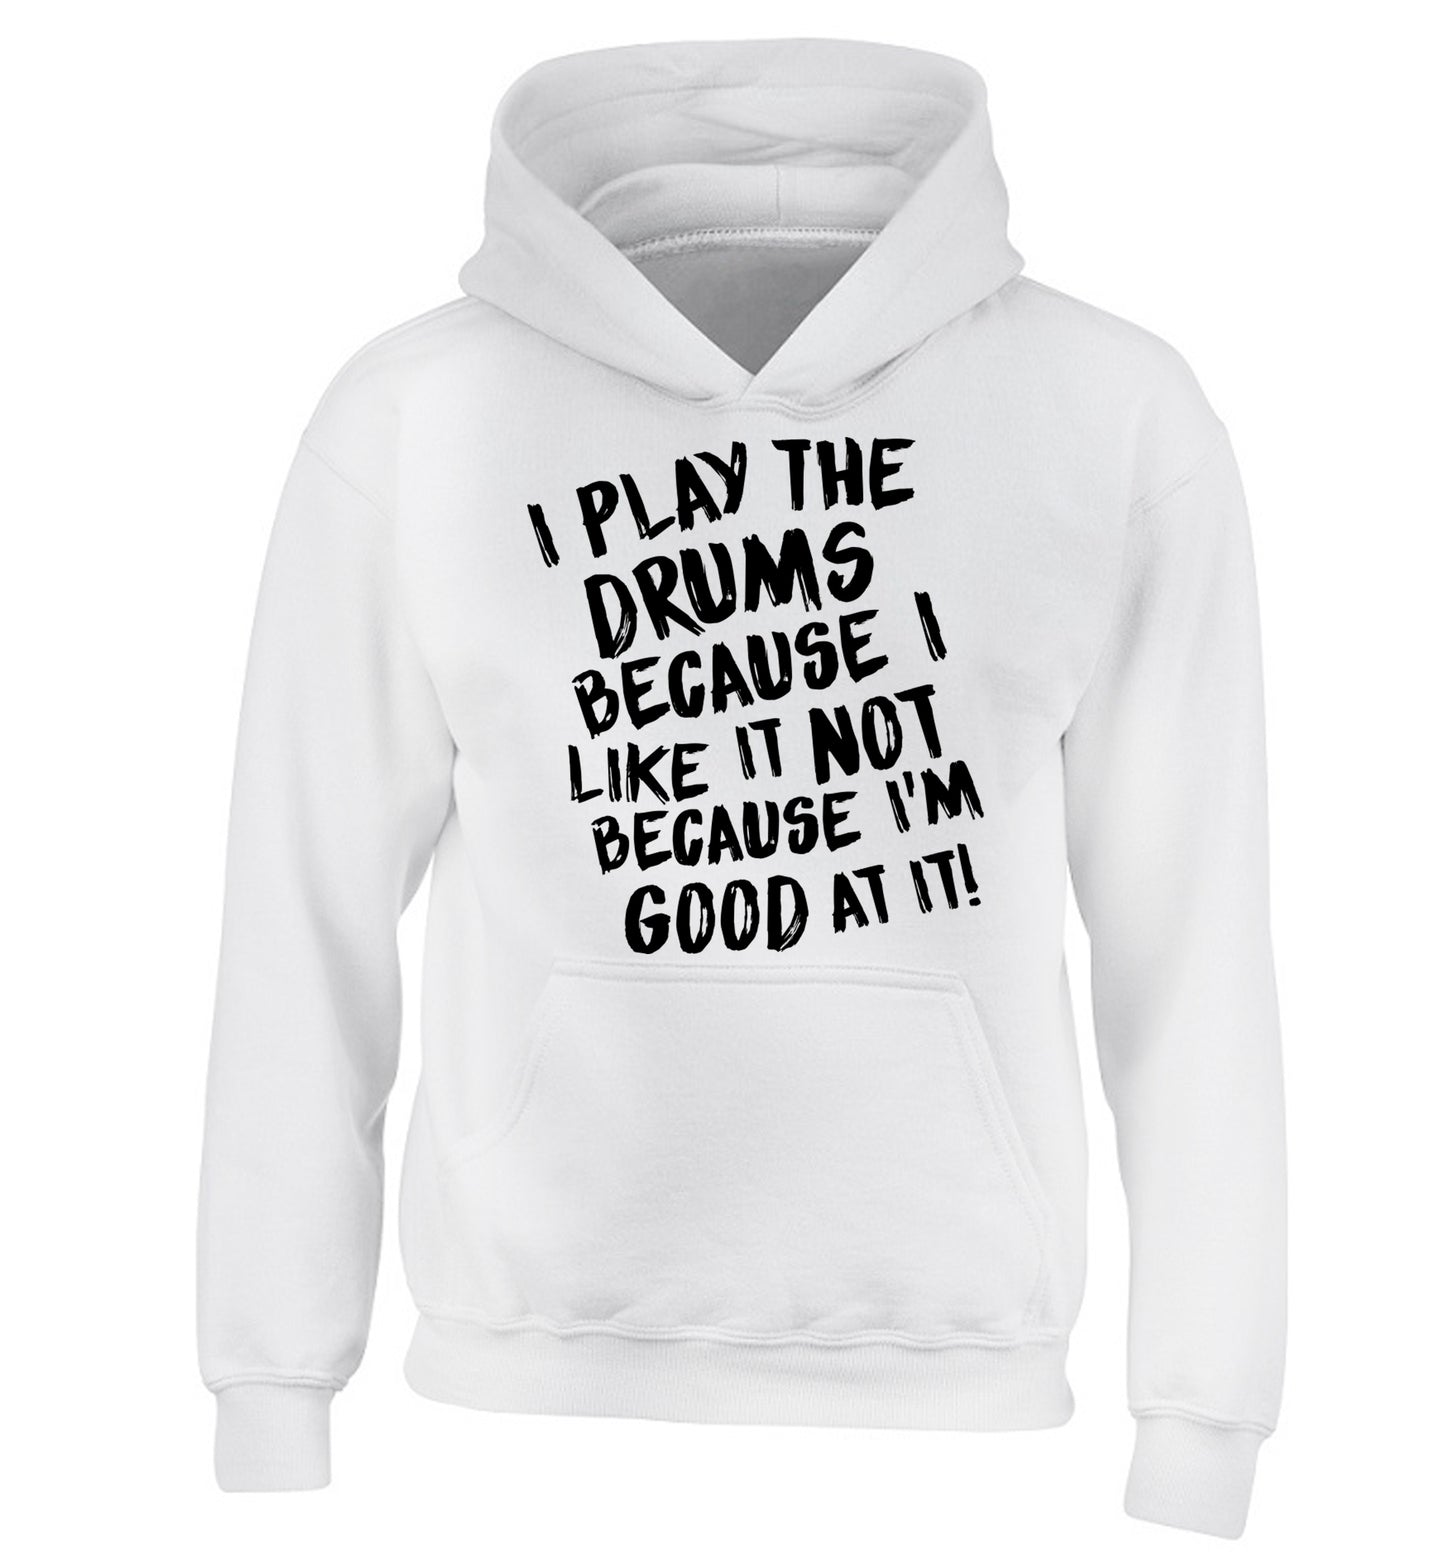 I play the drums because I like it not because I'm good at it children's white hoodie 12-14 Years